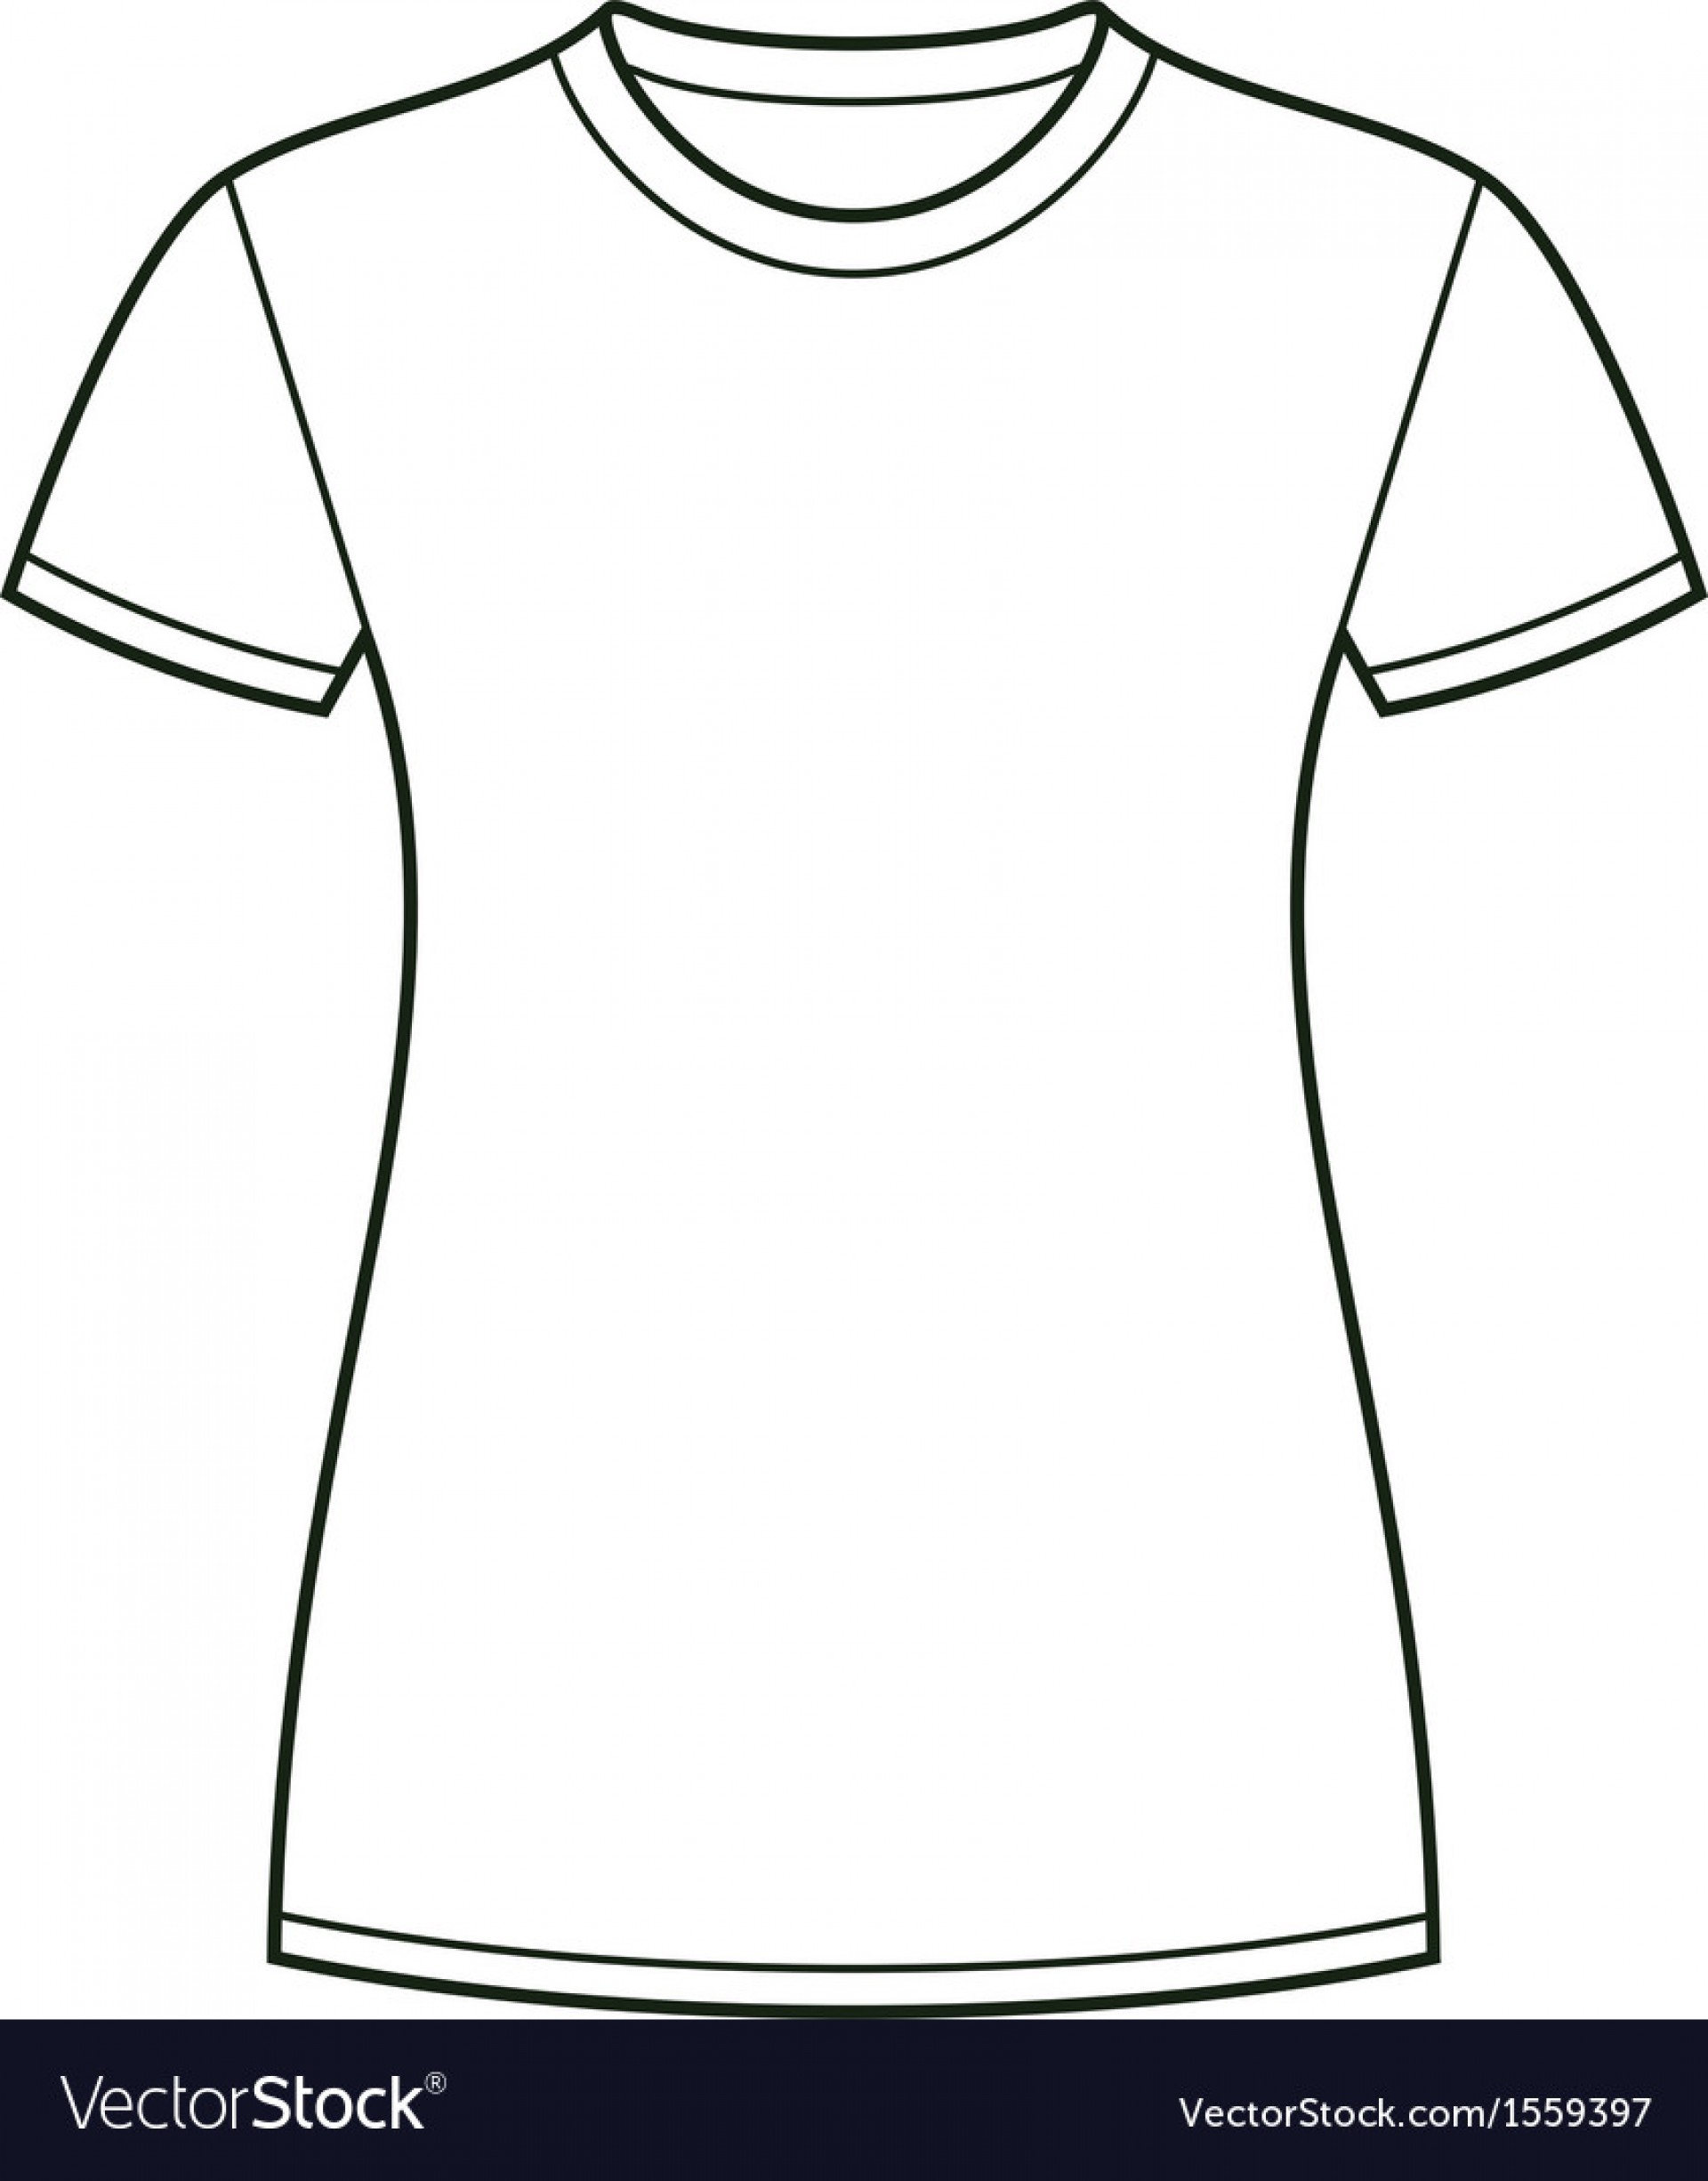 T Shirt Template Vector Free Download at GetDrawings Free download